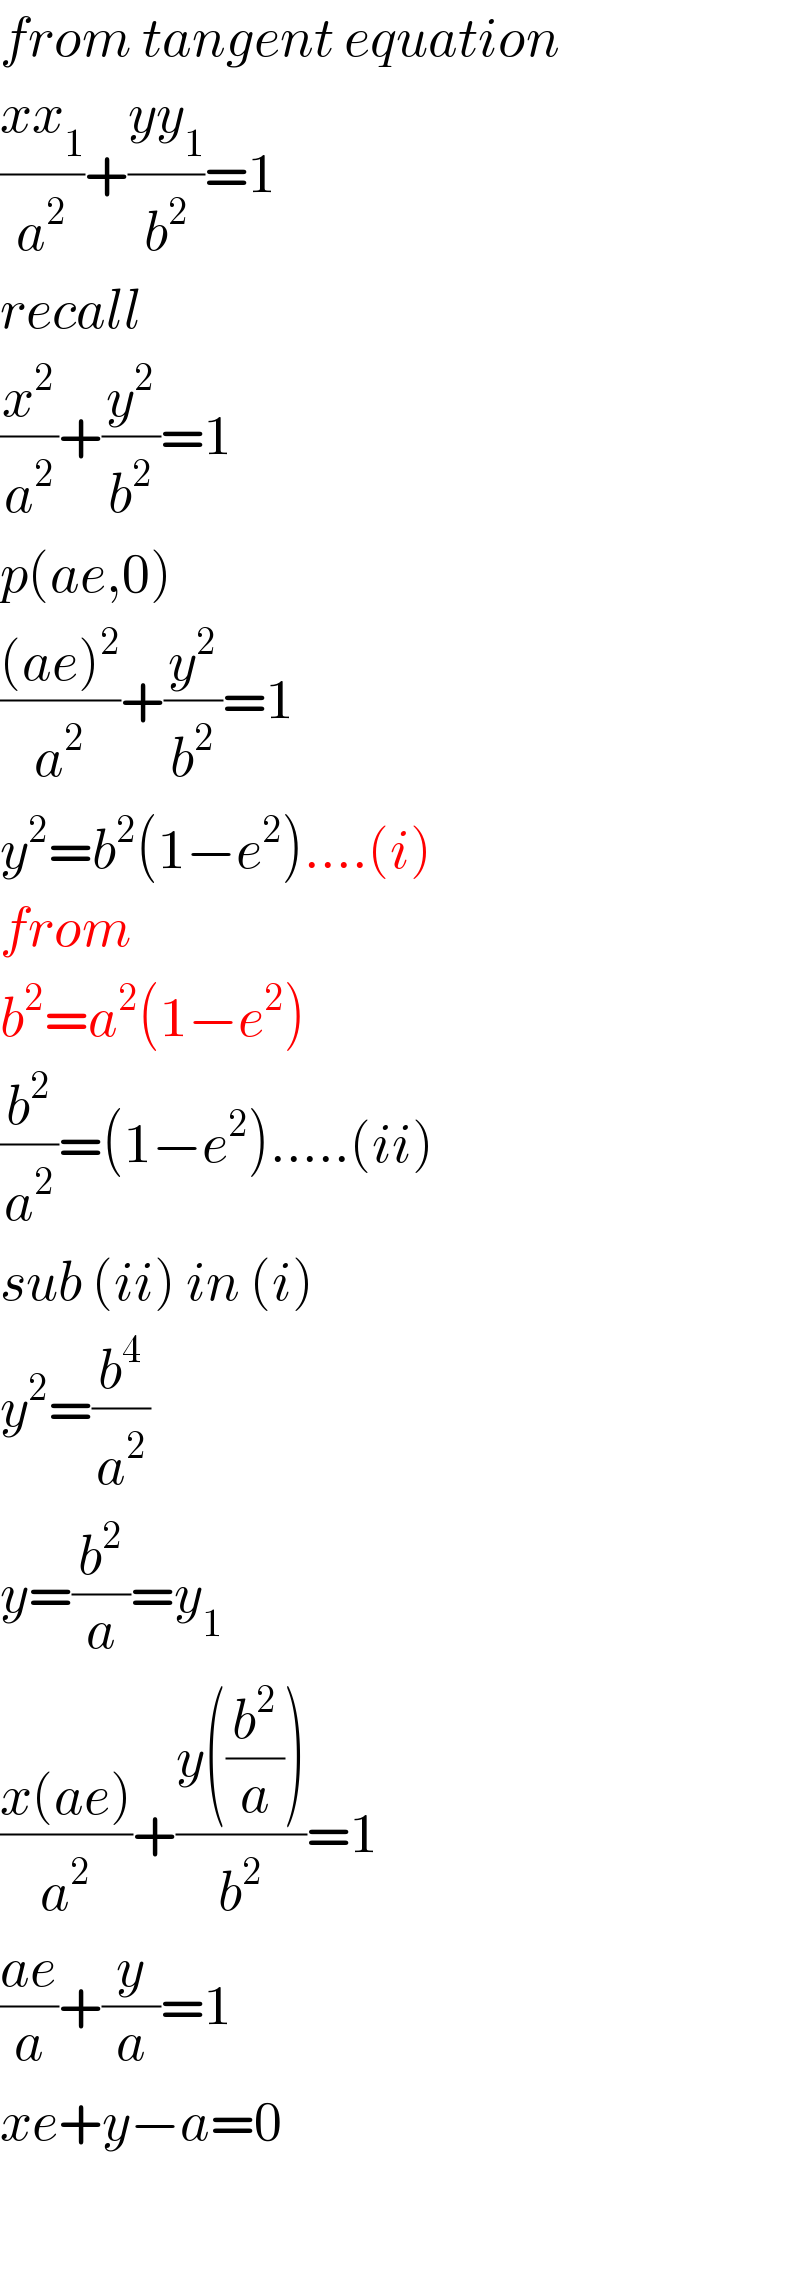 from tangent equation  ((xx_1 )/a^2 )+((yy_1 )/b^2 )=1  recall  (x^2 /a^2 )+(y^2 /b^2 )=1  p(ae,0)  (((ae)^2 )/a^2 )+(y^2 /b^2 )=1  y^2 =b^2 (1−e^2 )....(i)  from  b^2 =a^2 (1−e^2 )  (b^2 /a^2 )=(1−e^2 ).....(ii)  sub (ii) in (i)  y^2 =(b^4 /a^2 )  y=(b^2 /a)=y_1   ((x(ae))/a^2 )+((y((b^2 /a)))/b^2 )=1  ((ae)/a)+(y/a)=1  xe+y−a=0    